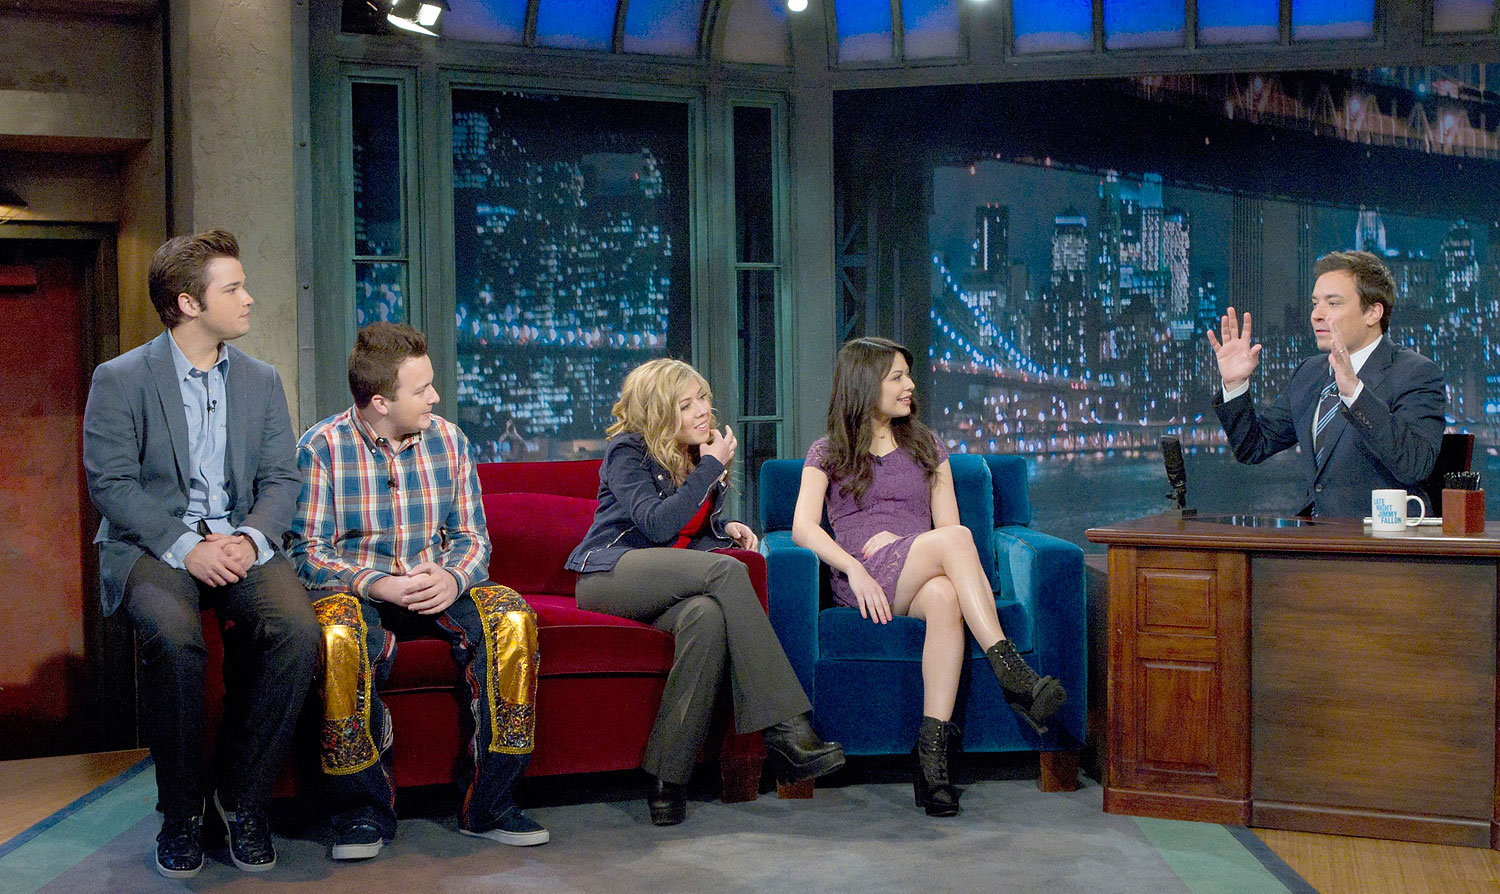 The cast of iCarly and Jimmy Fallon in a cross over episode of iCarly. (Viacom International)